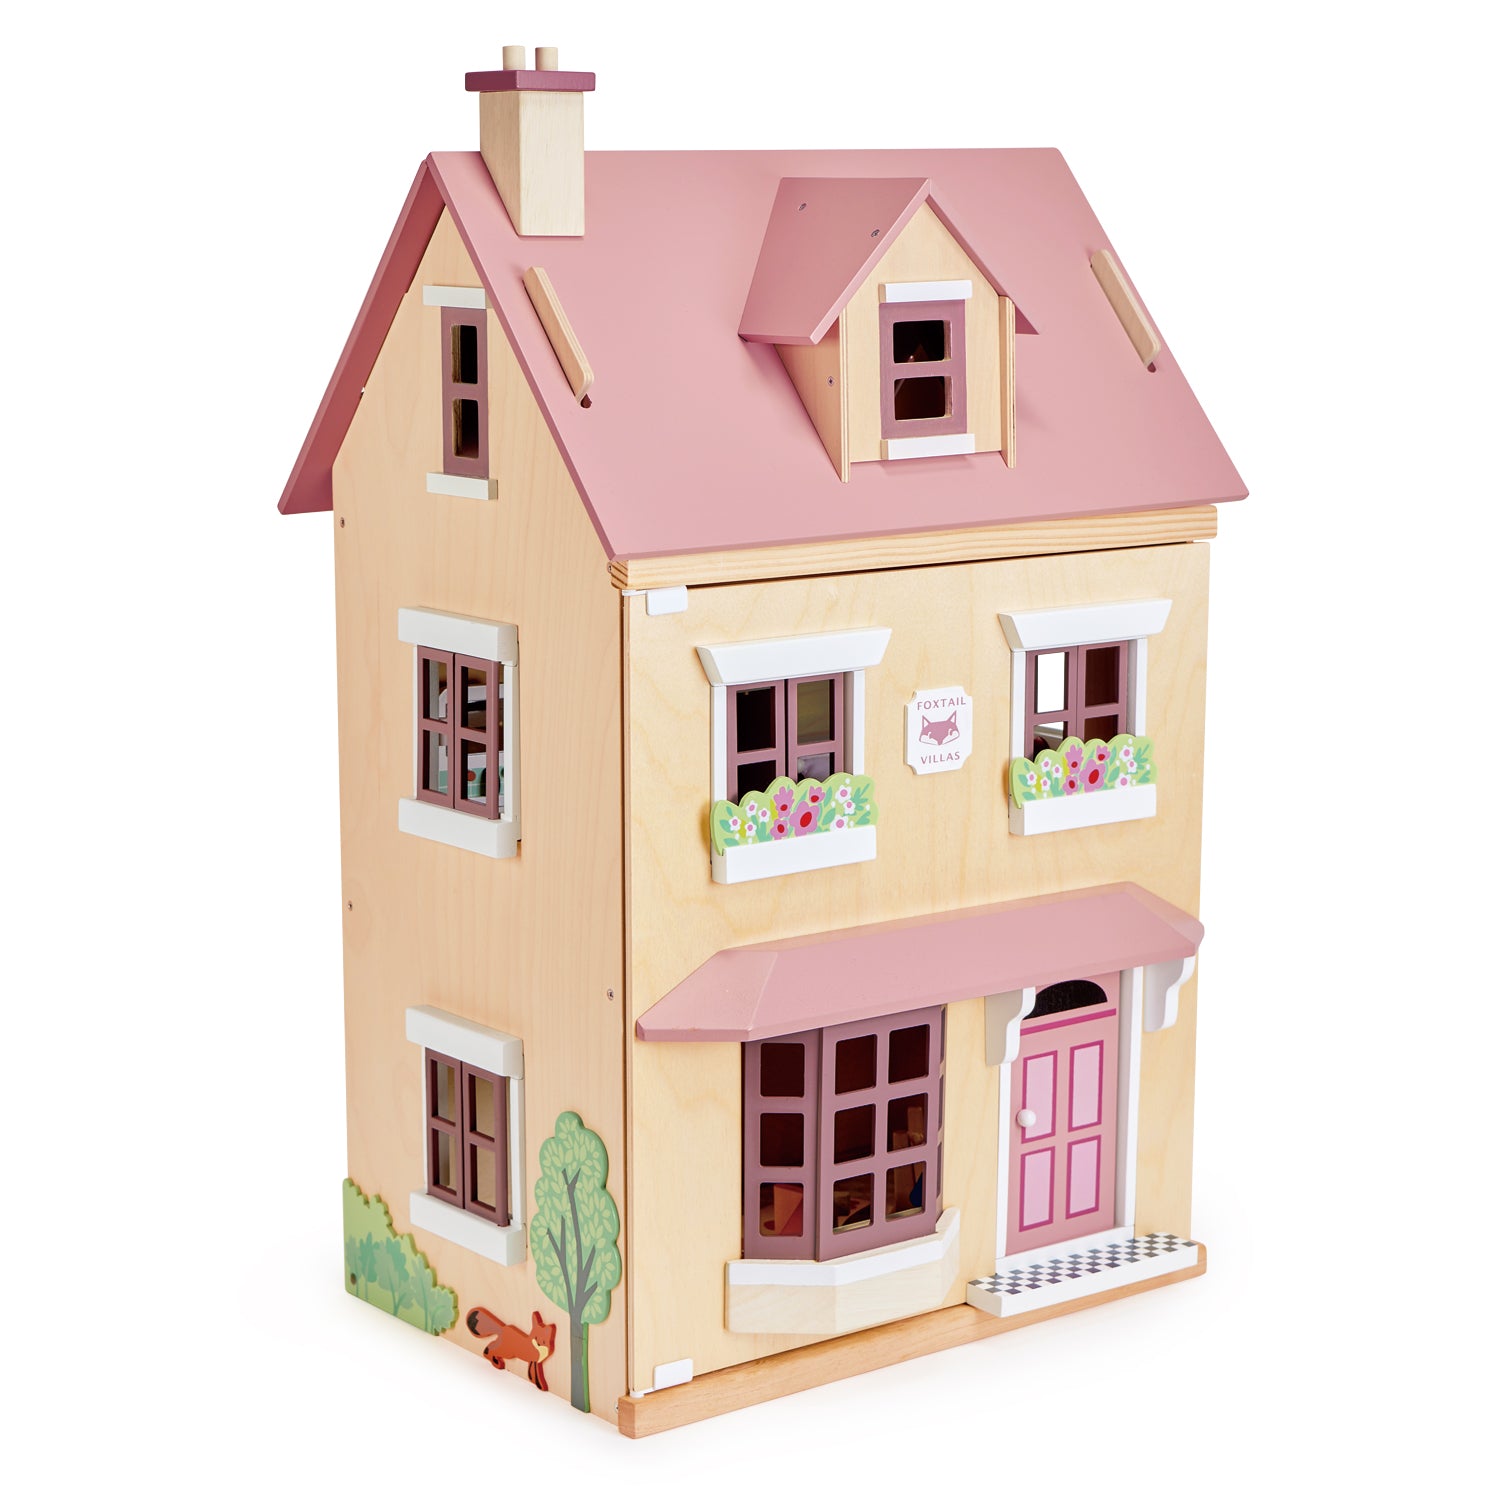 <p>Foxtail Villa is the perfect town-style dolls house. The subtle colors and top-quality FSC plywood fascia make this a beautiful mid-size dolls house for any little boy or girl, with a clever design to lift and hold the roof to access the attic. Included is a starter set of matching furniture: A cooker, sink unit, table and chair, coffee pot, jam pot, bowl of apples, sofa with printed cushions, floor mat, side table, tabletop lamp, standard lamp, pillow, bed with coverlet, wardrobe, retro style toilet and bathroom sink unit.</p>
<p><strong>Self-assembly required. Dolls sold separately.</strong></p>
<p>Age range: 3 years +  </p>
<p>Product size: 17.32 x 14.57 x 27.95”  </p>
<p>Weight: 14.63 Ibs</p>
<p><a href="https://www.dropbox.com/s/d7pk9cf44jwfj5r/TL8128%20Foxtail%20Villa%20Printable.pdf?dl=0"><strong>Download Foxtail Villa Printable</strong></a></p>
